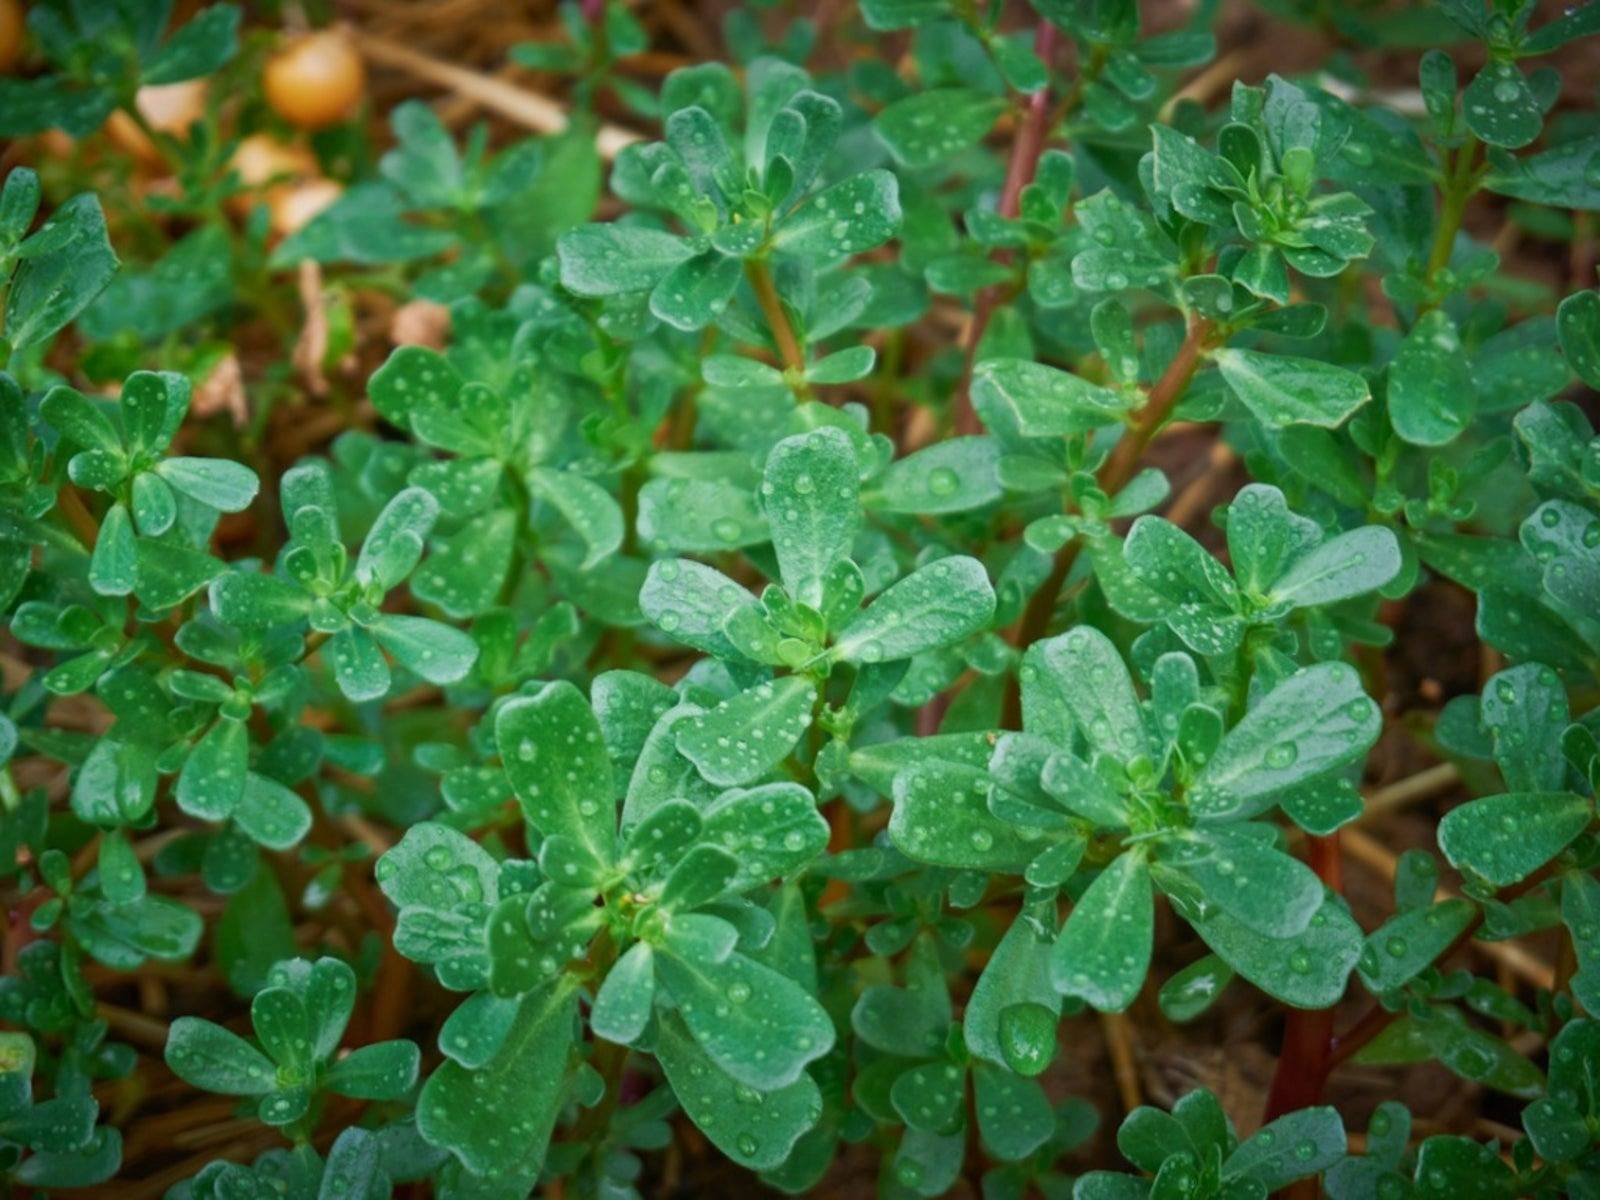 8 Secret Powers Of Purslane: Why You Should Keep This Plant In Your Garden - 61